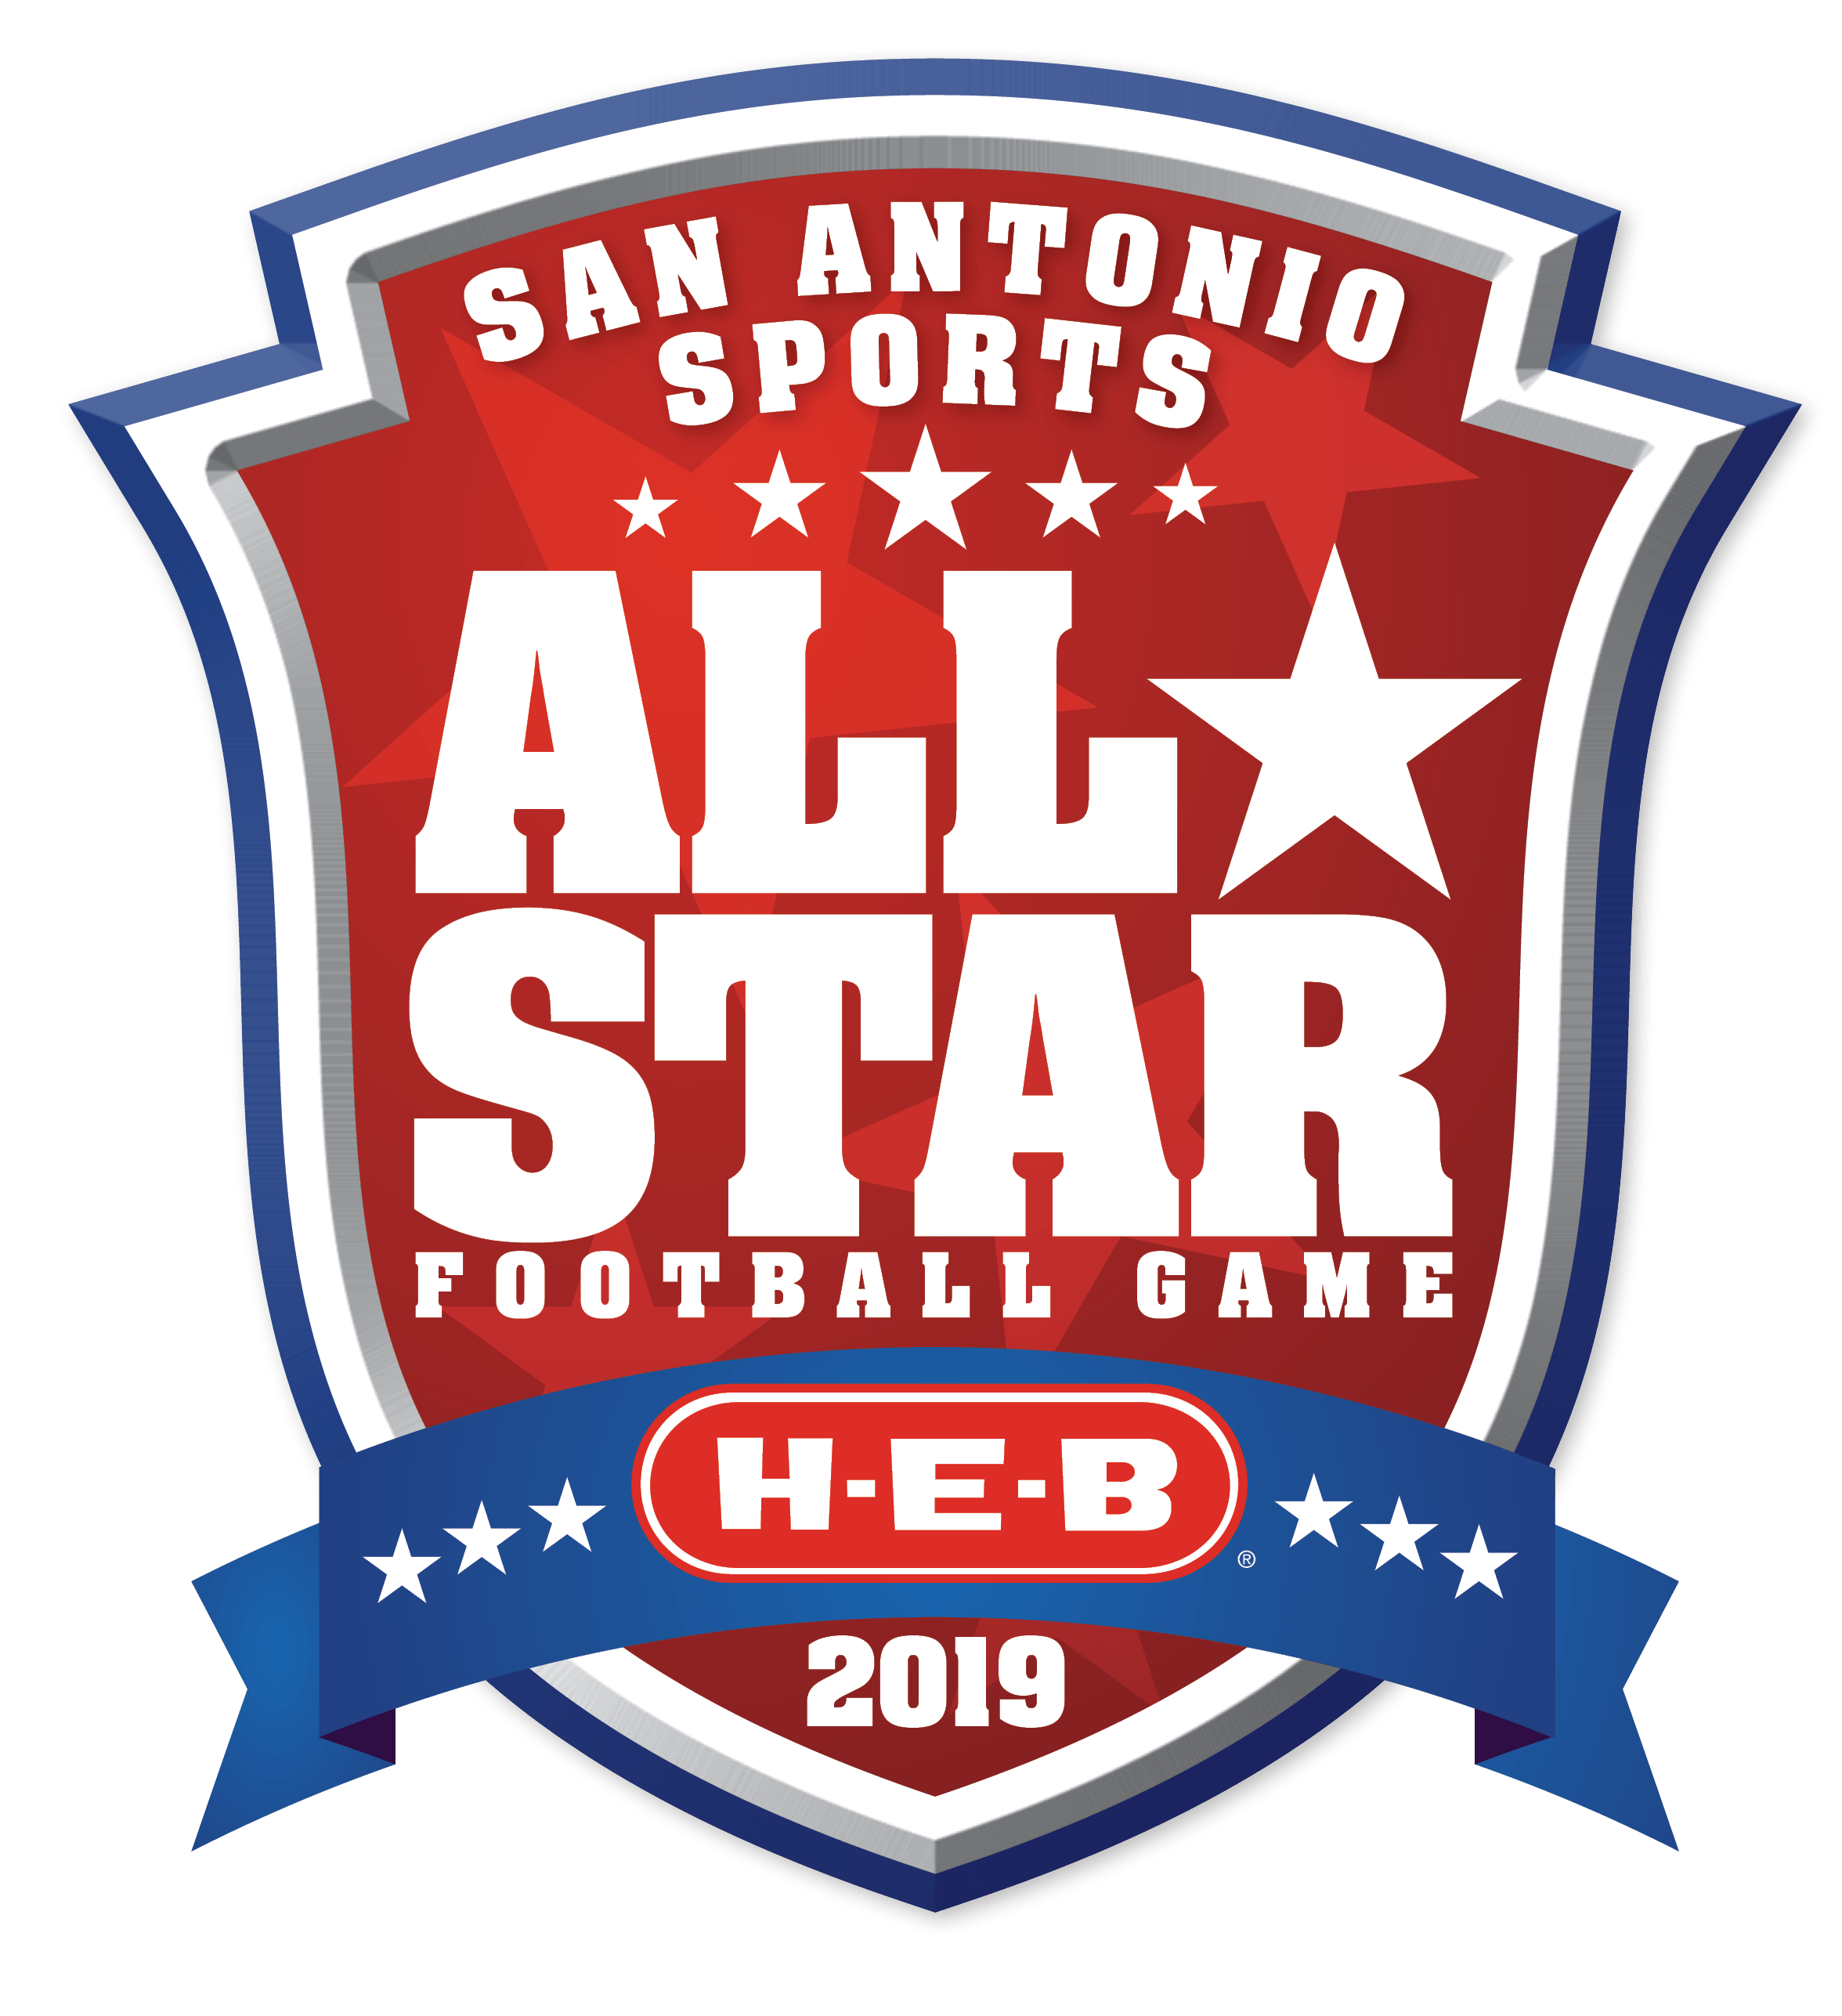 Red H Football Logo - PLAYERS ANNOUNCED FOR 2019 SAN ANTONIO SPORTS ALL STAR FOOTBALL GAME